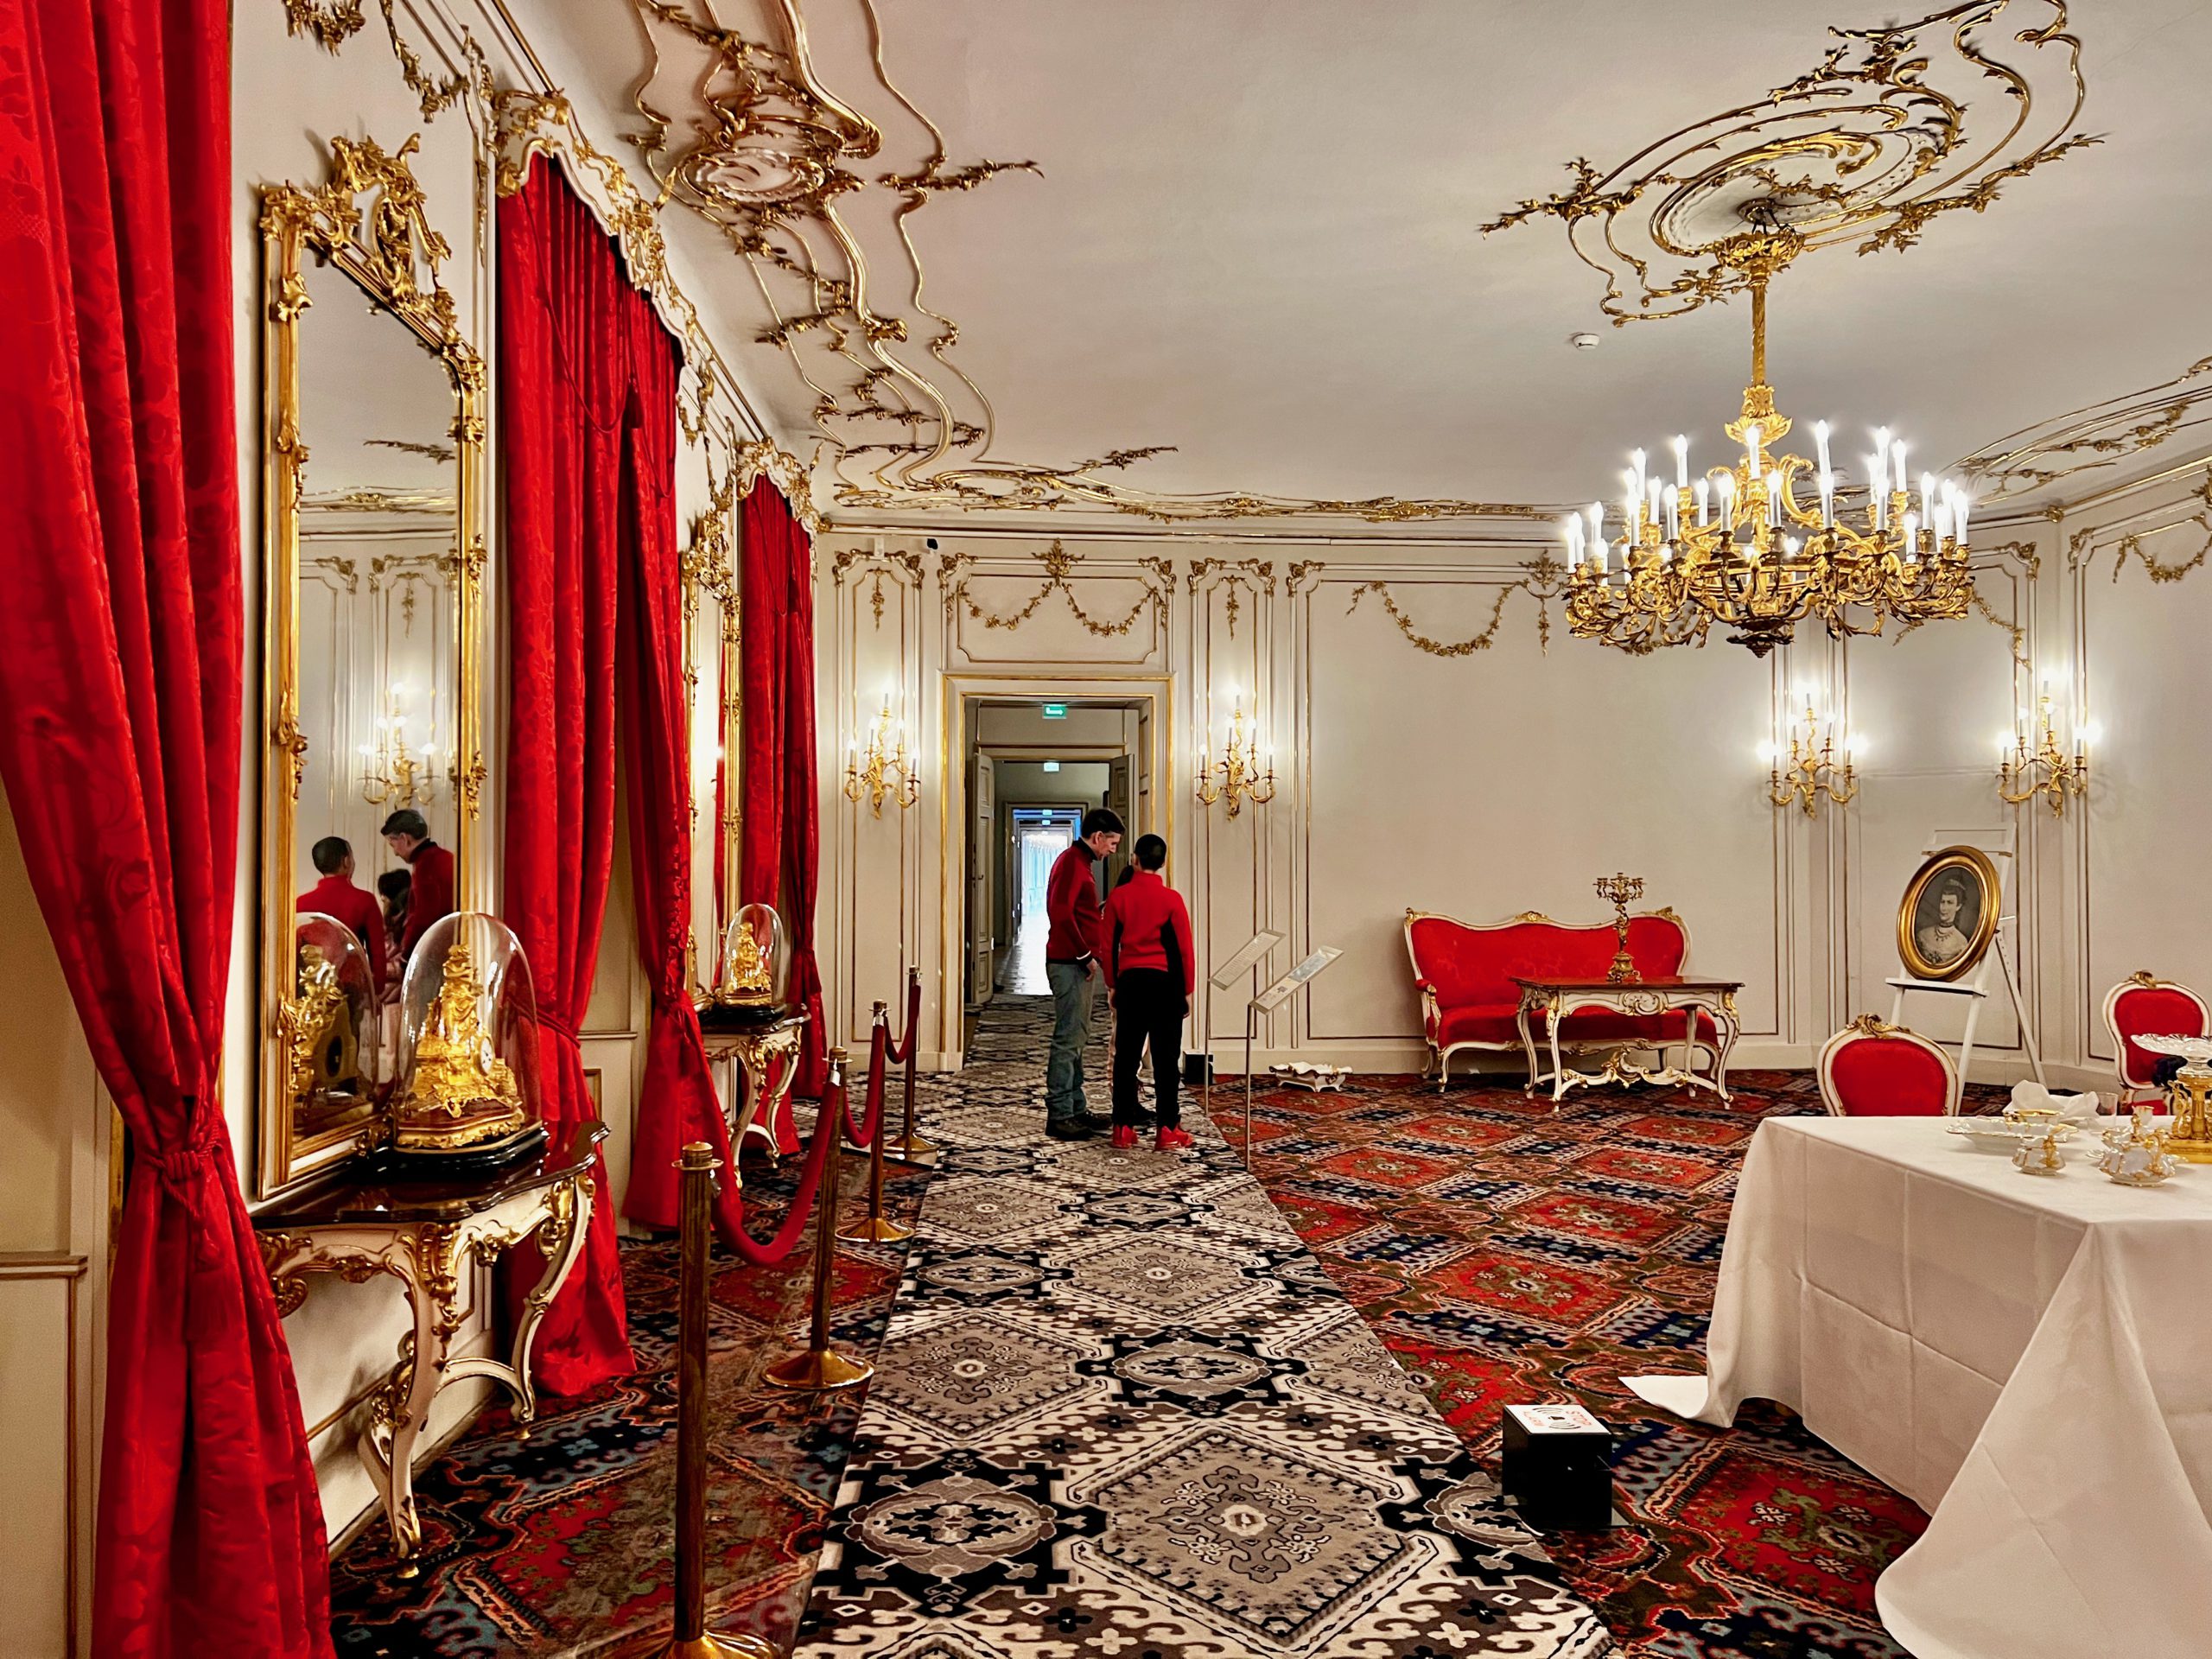 A dad and his young son look at the opulent furnishings of a richly decorated room in the Imperial Palace, one of the best things to do in Innsbruck with kids this winter.